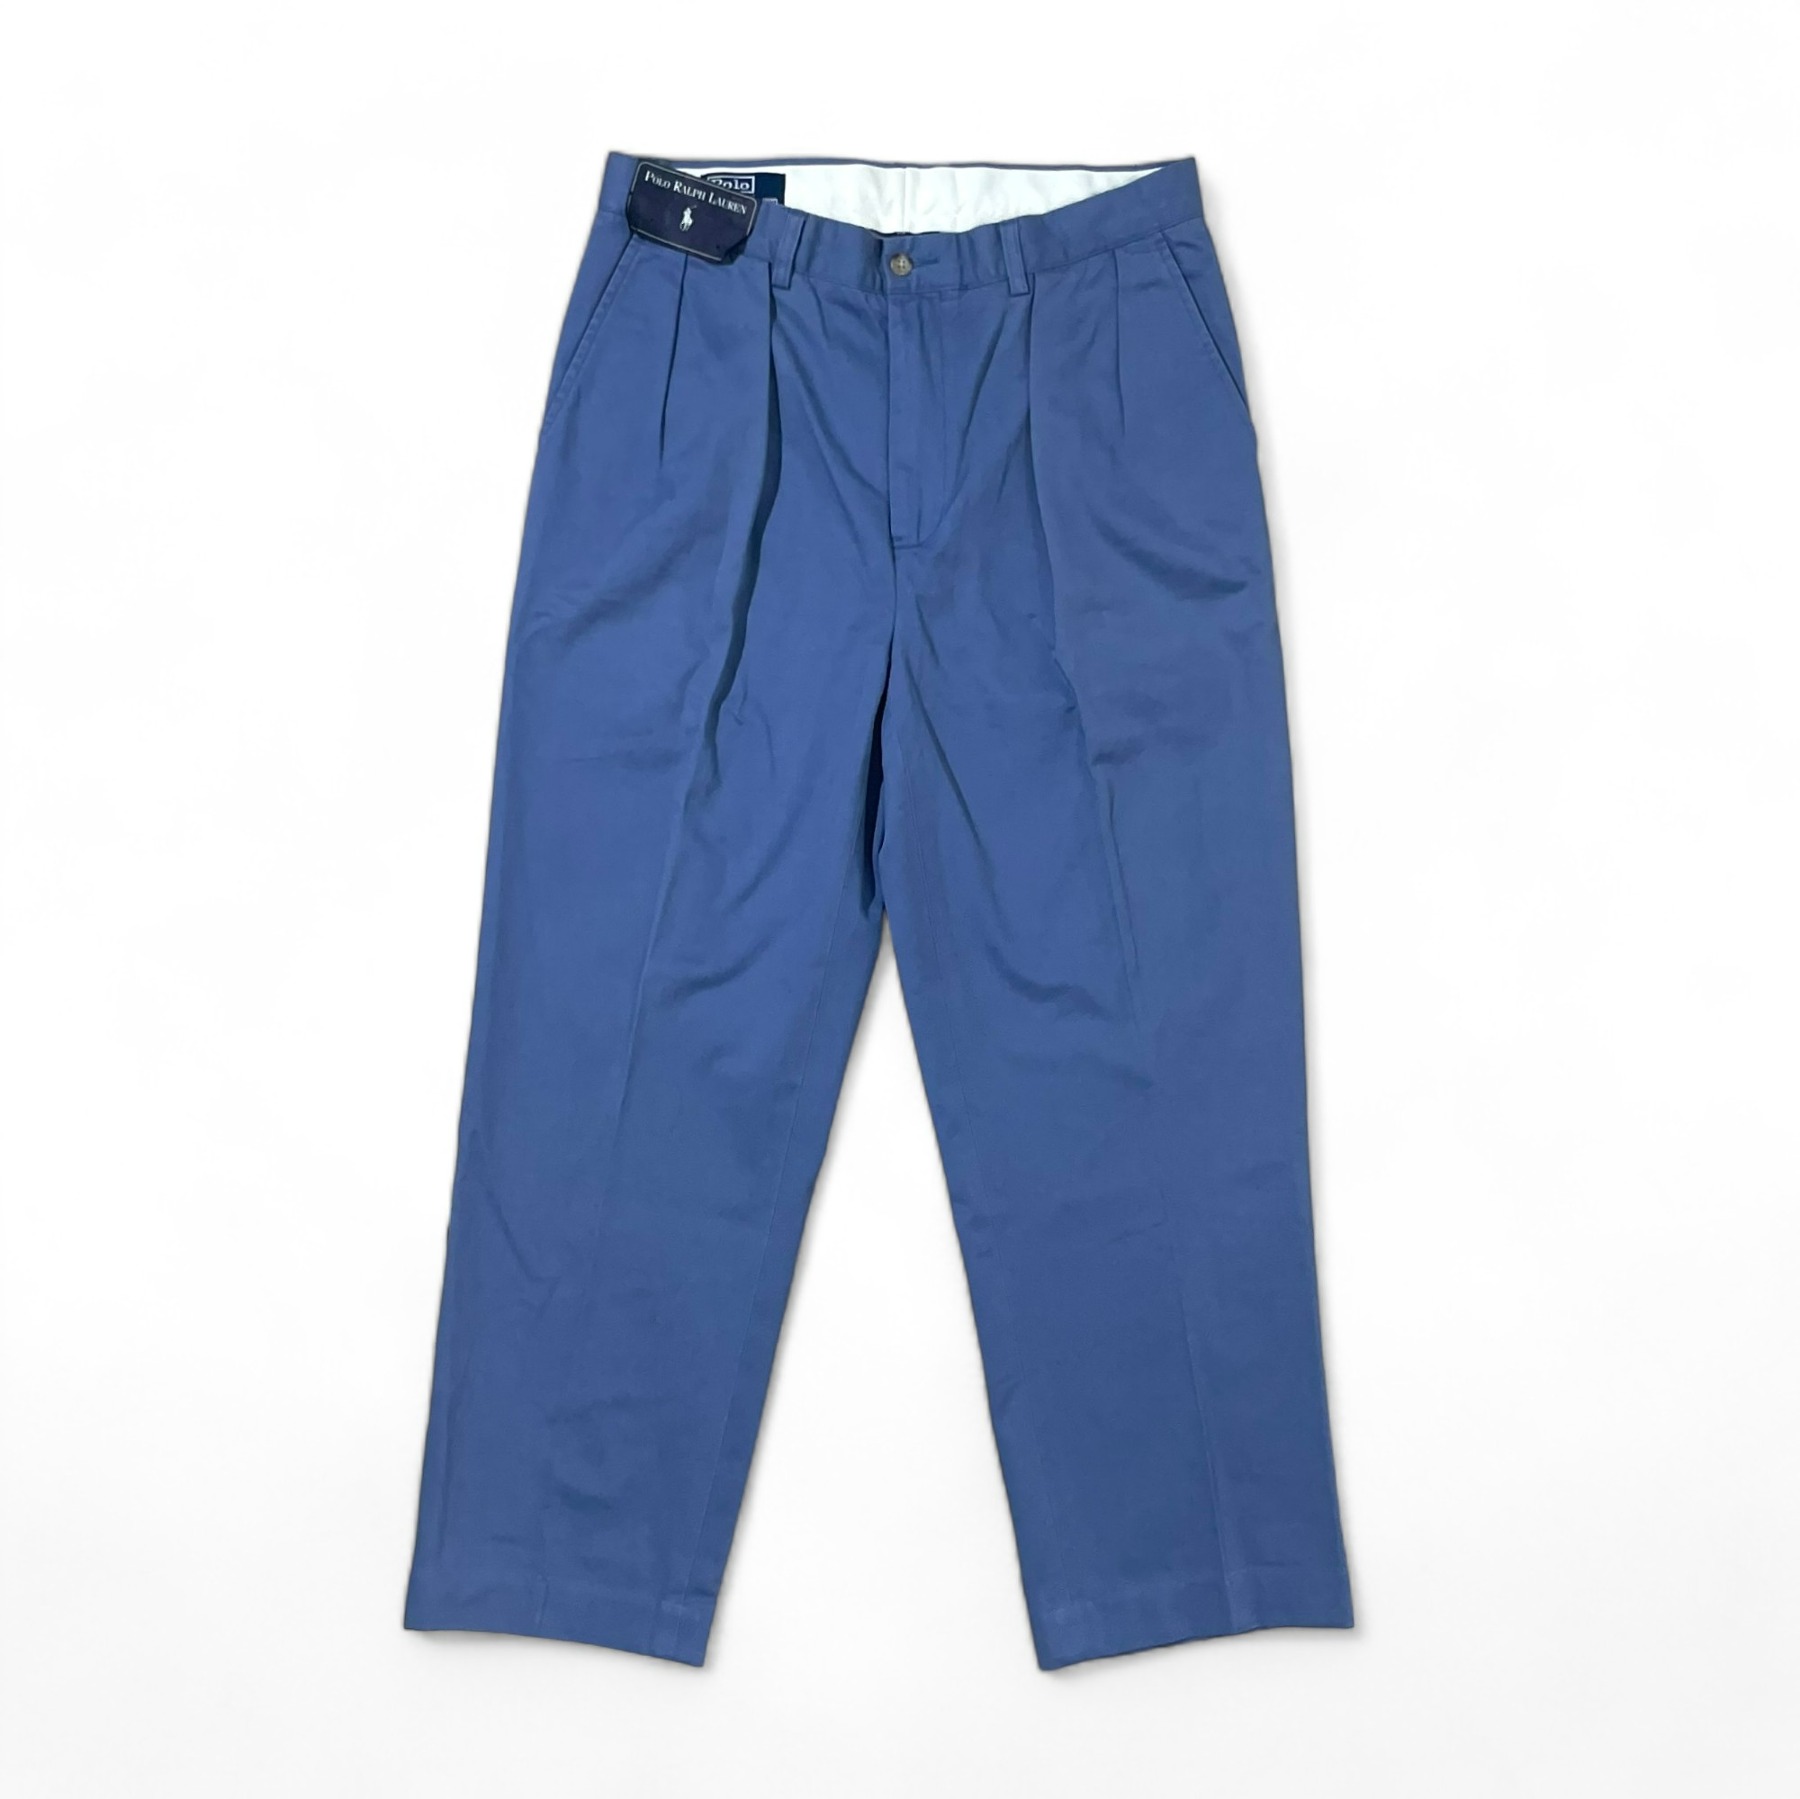 Old Polo Deadstock Chino Pants - 33inch